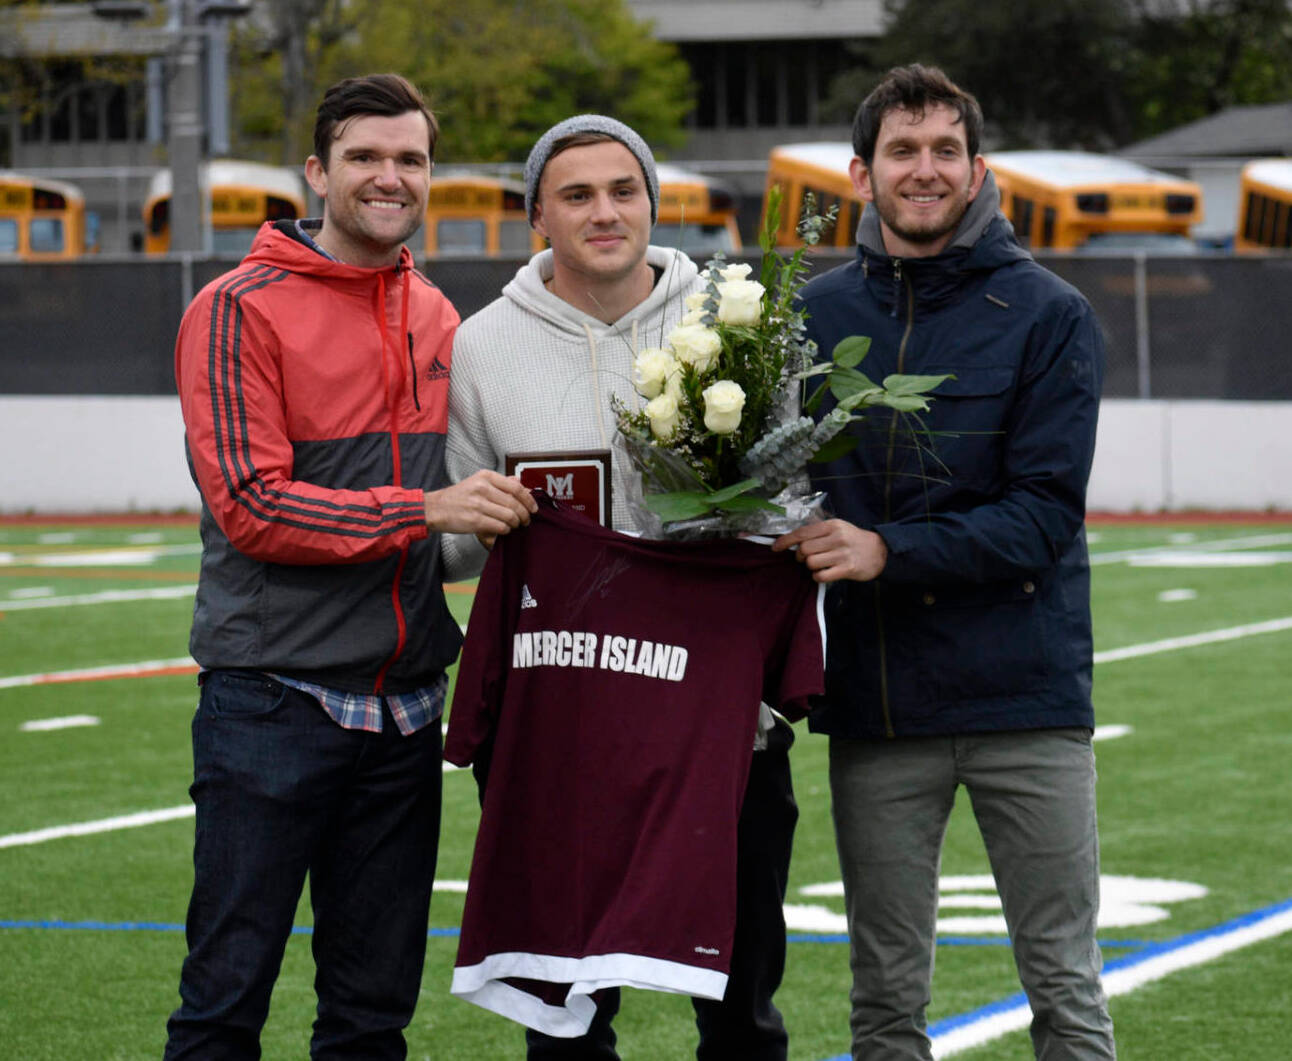 Former Mercer Island High School boys soccer head coach Colin Rigby, left, Jordan Morris, center, and Islanders boys soccer head coach Forrest Marowitz pose for a quick photo on April 23, 2019, at Islander Stadium. Morris was inducted into the Mercer Island High School Athletic Hall of Fame. Photo courtesy of Kim Otte